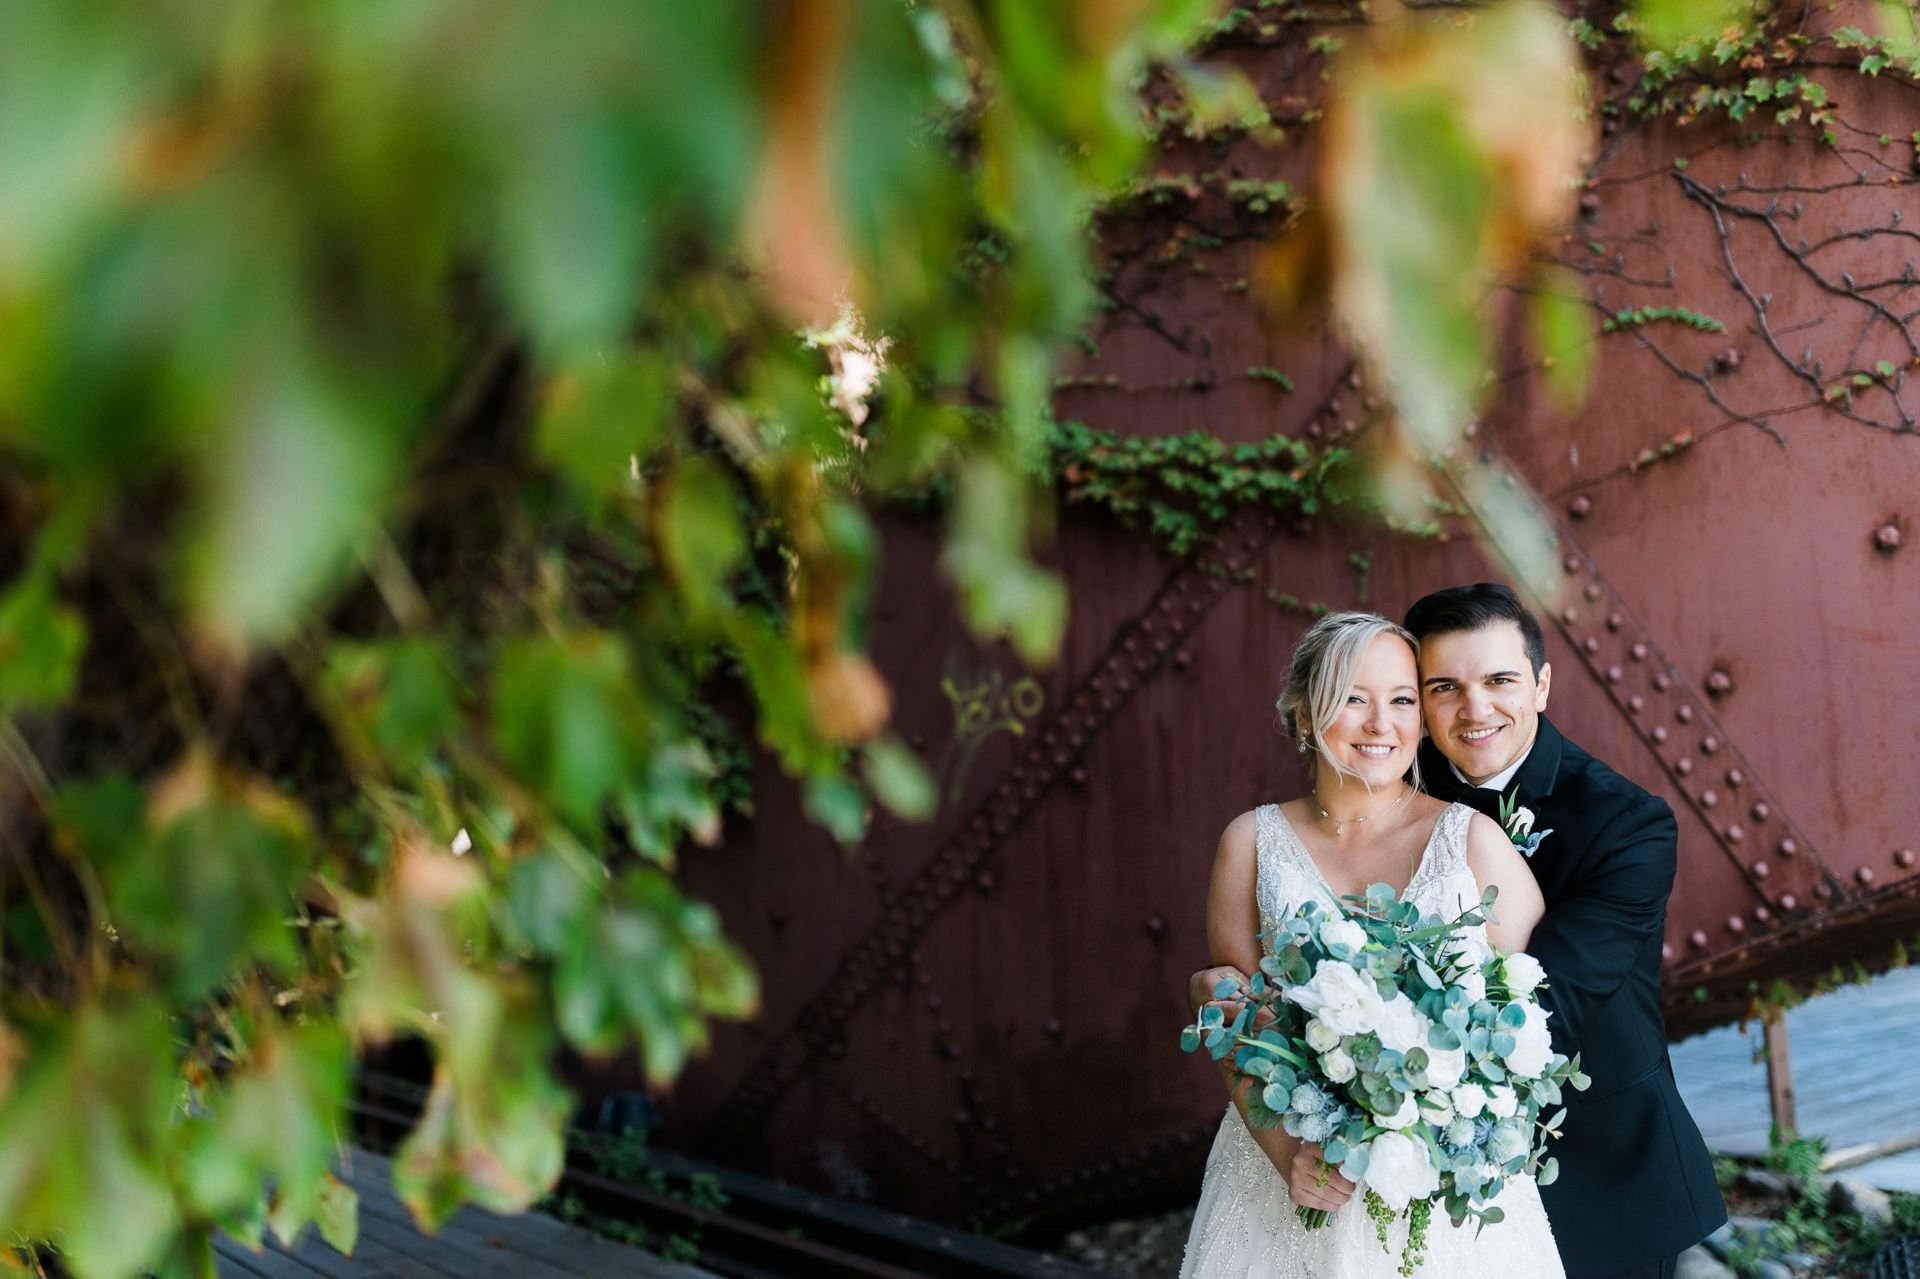 Cleveland Wedding Photographer at Windows on the River 01 43.jpg